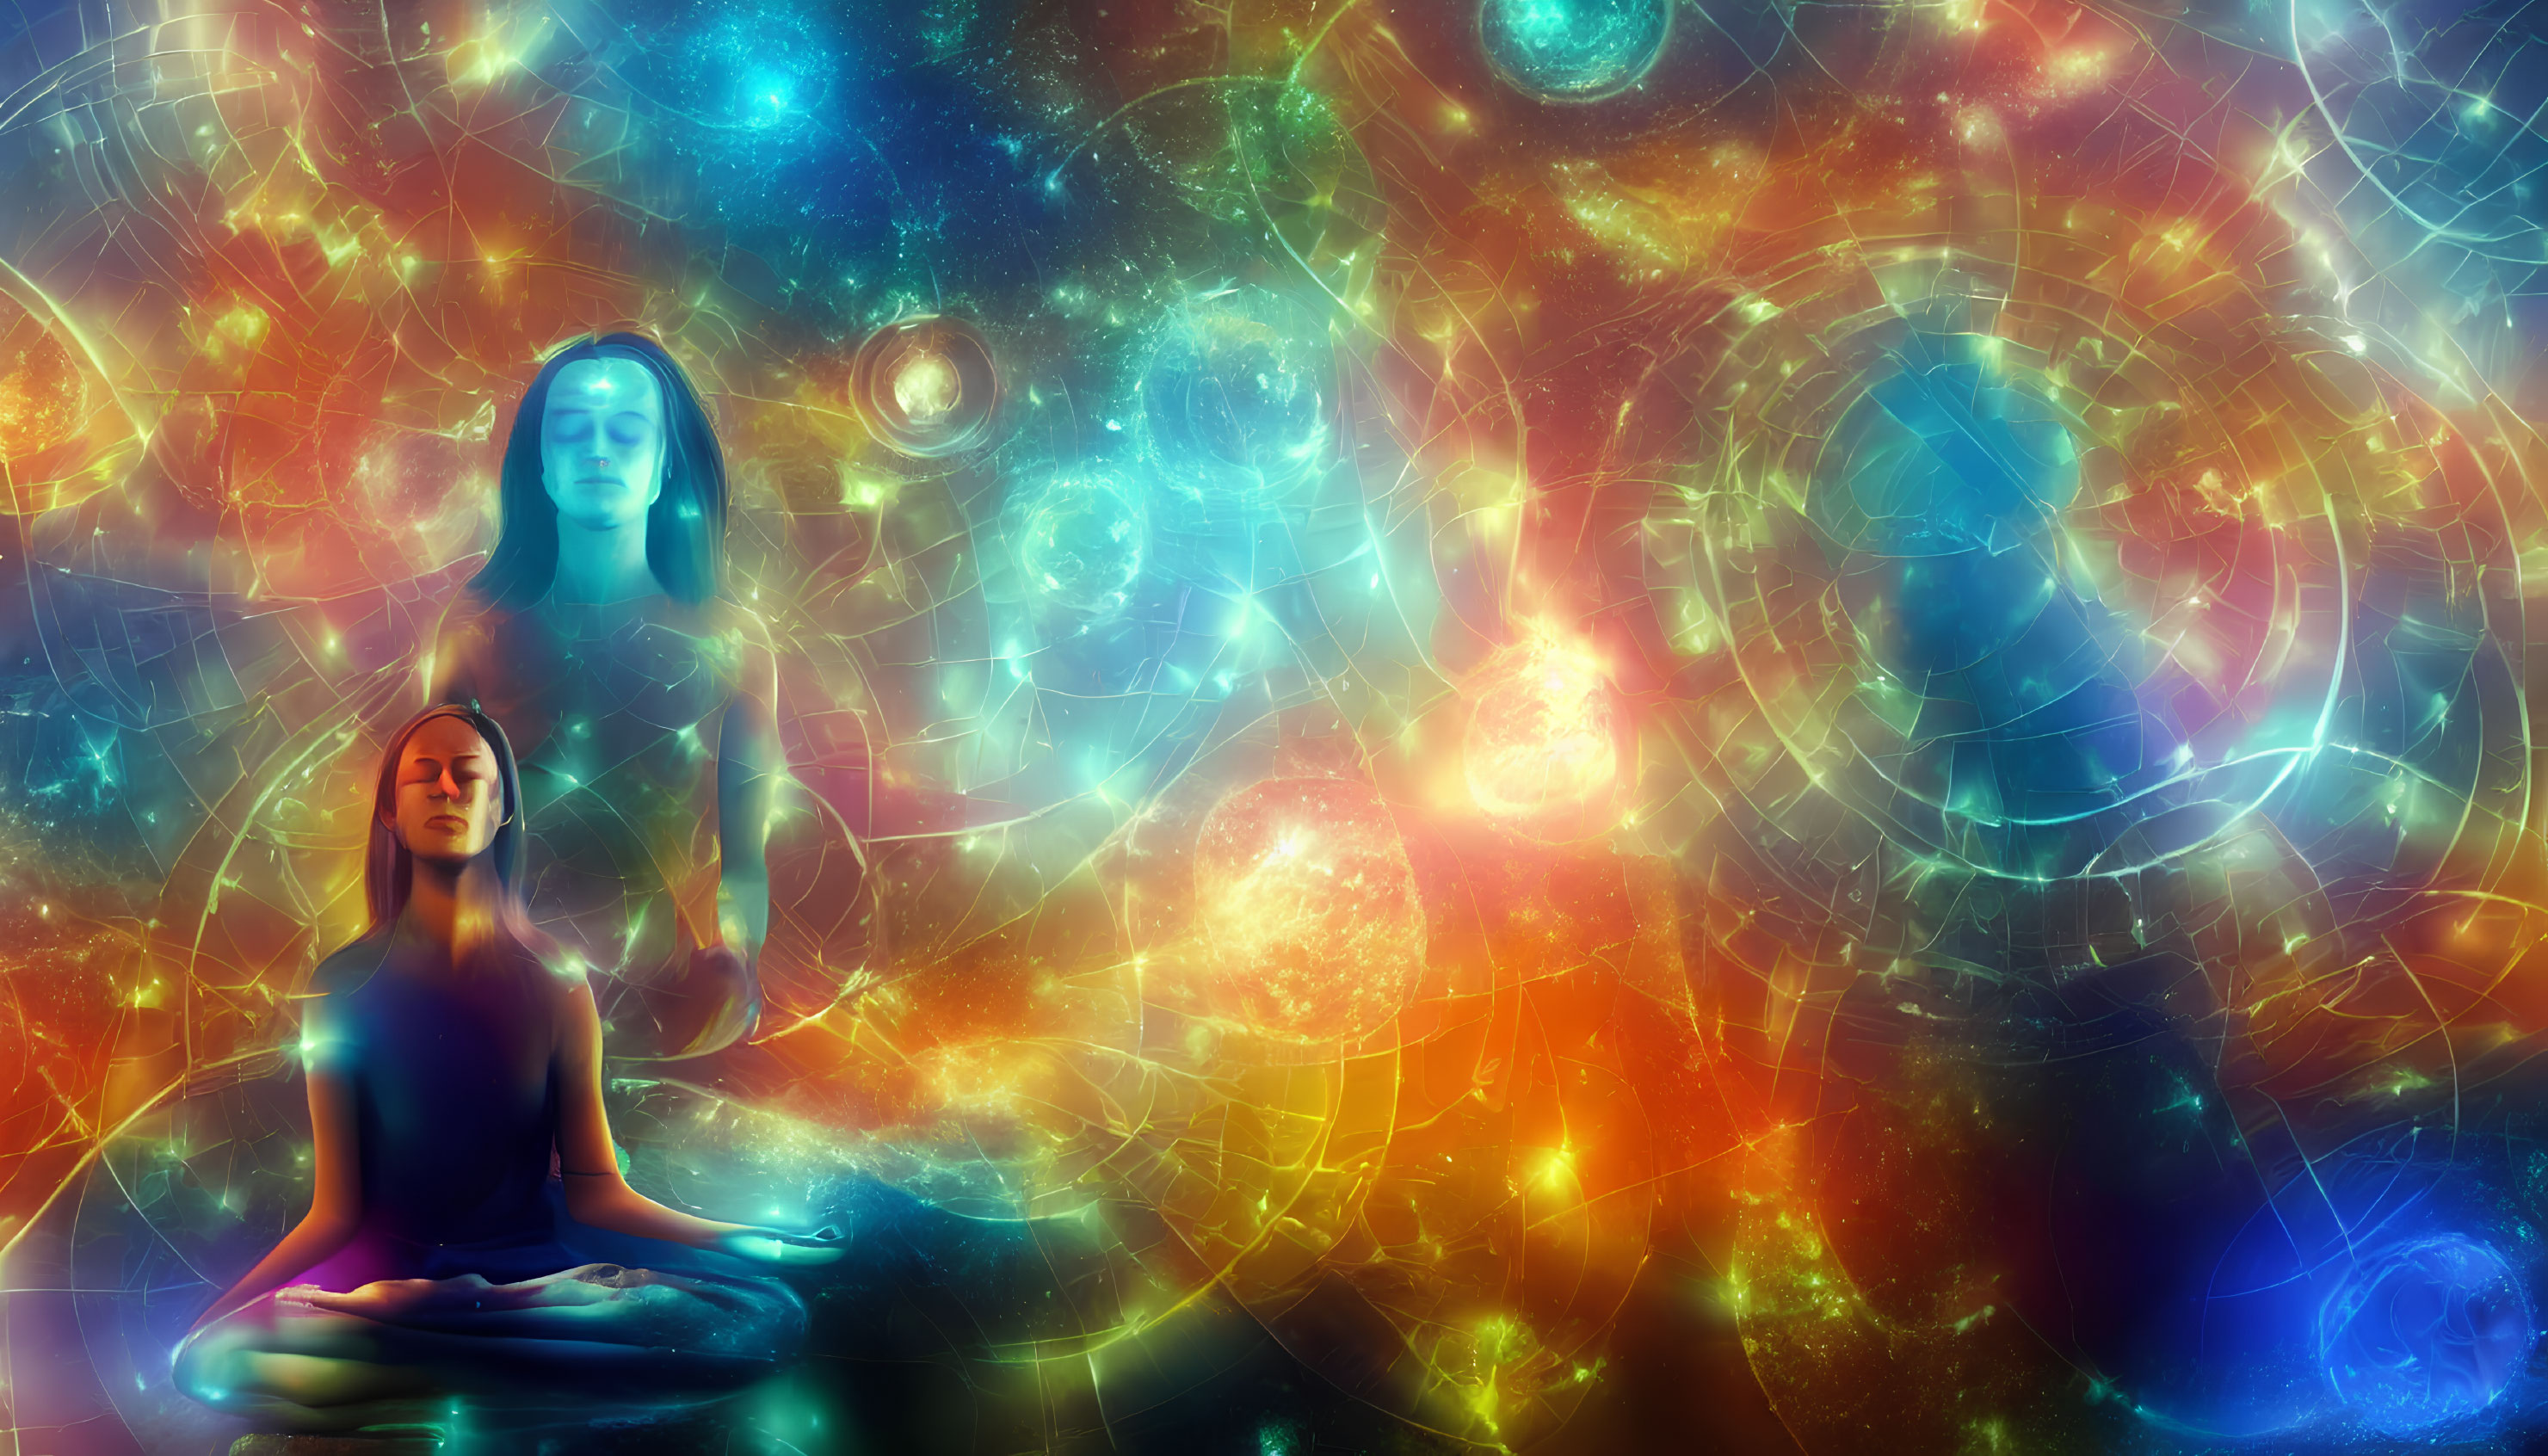 Meditation scene with celestial bodies and cosmic energy patterns